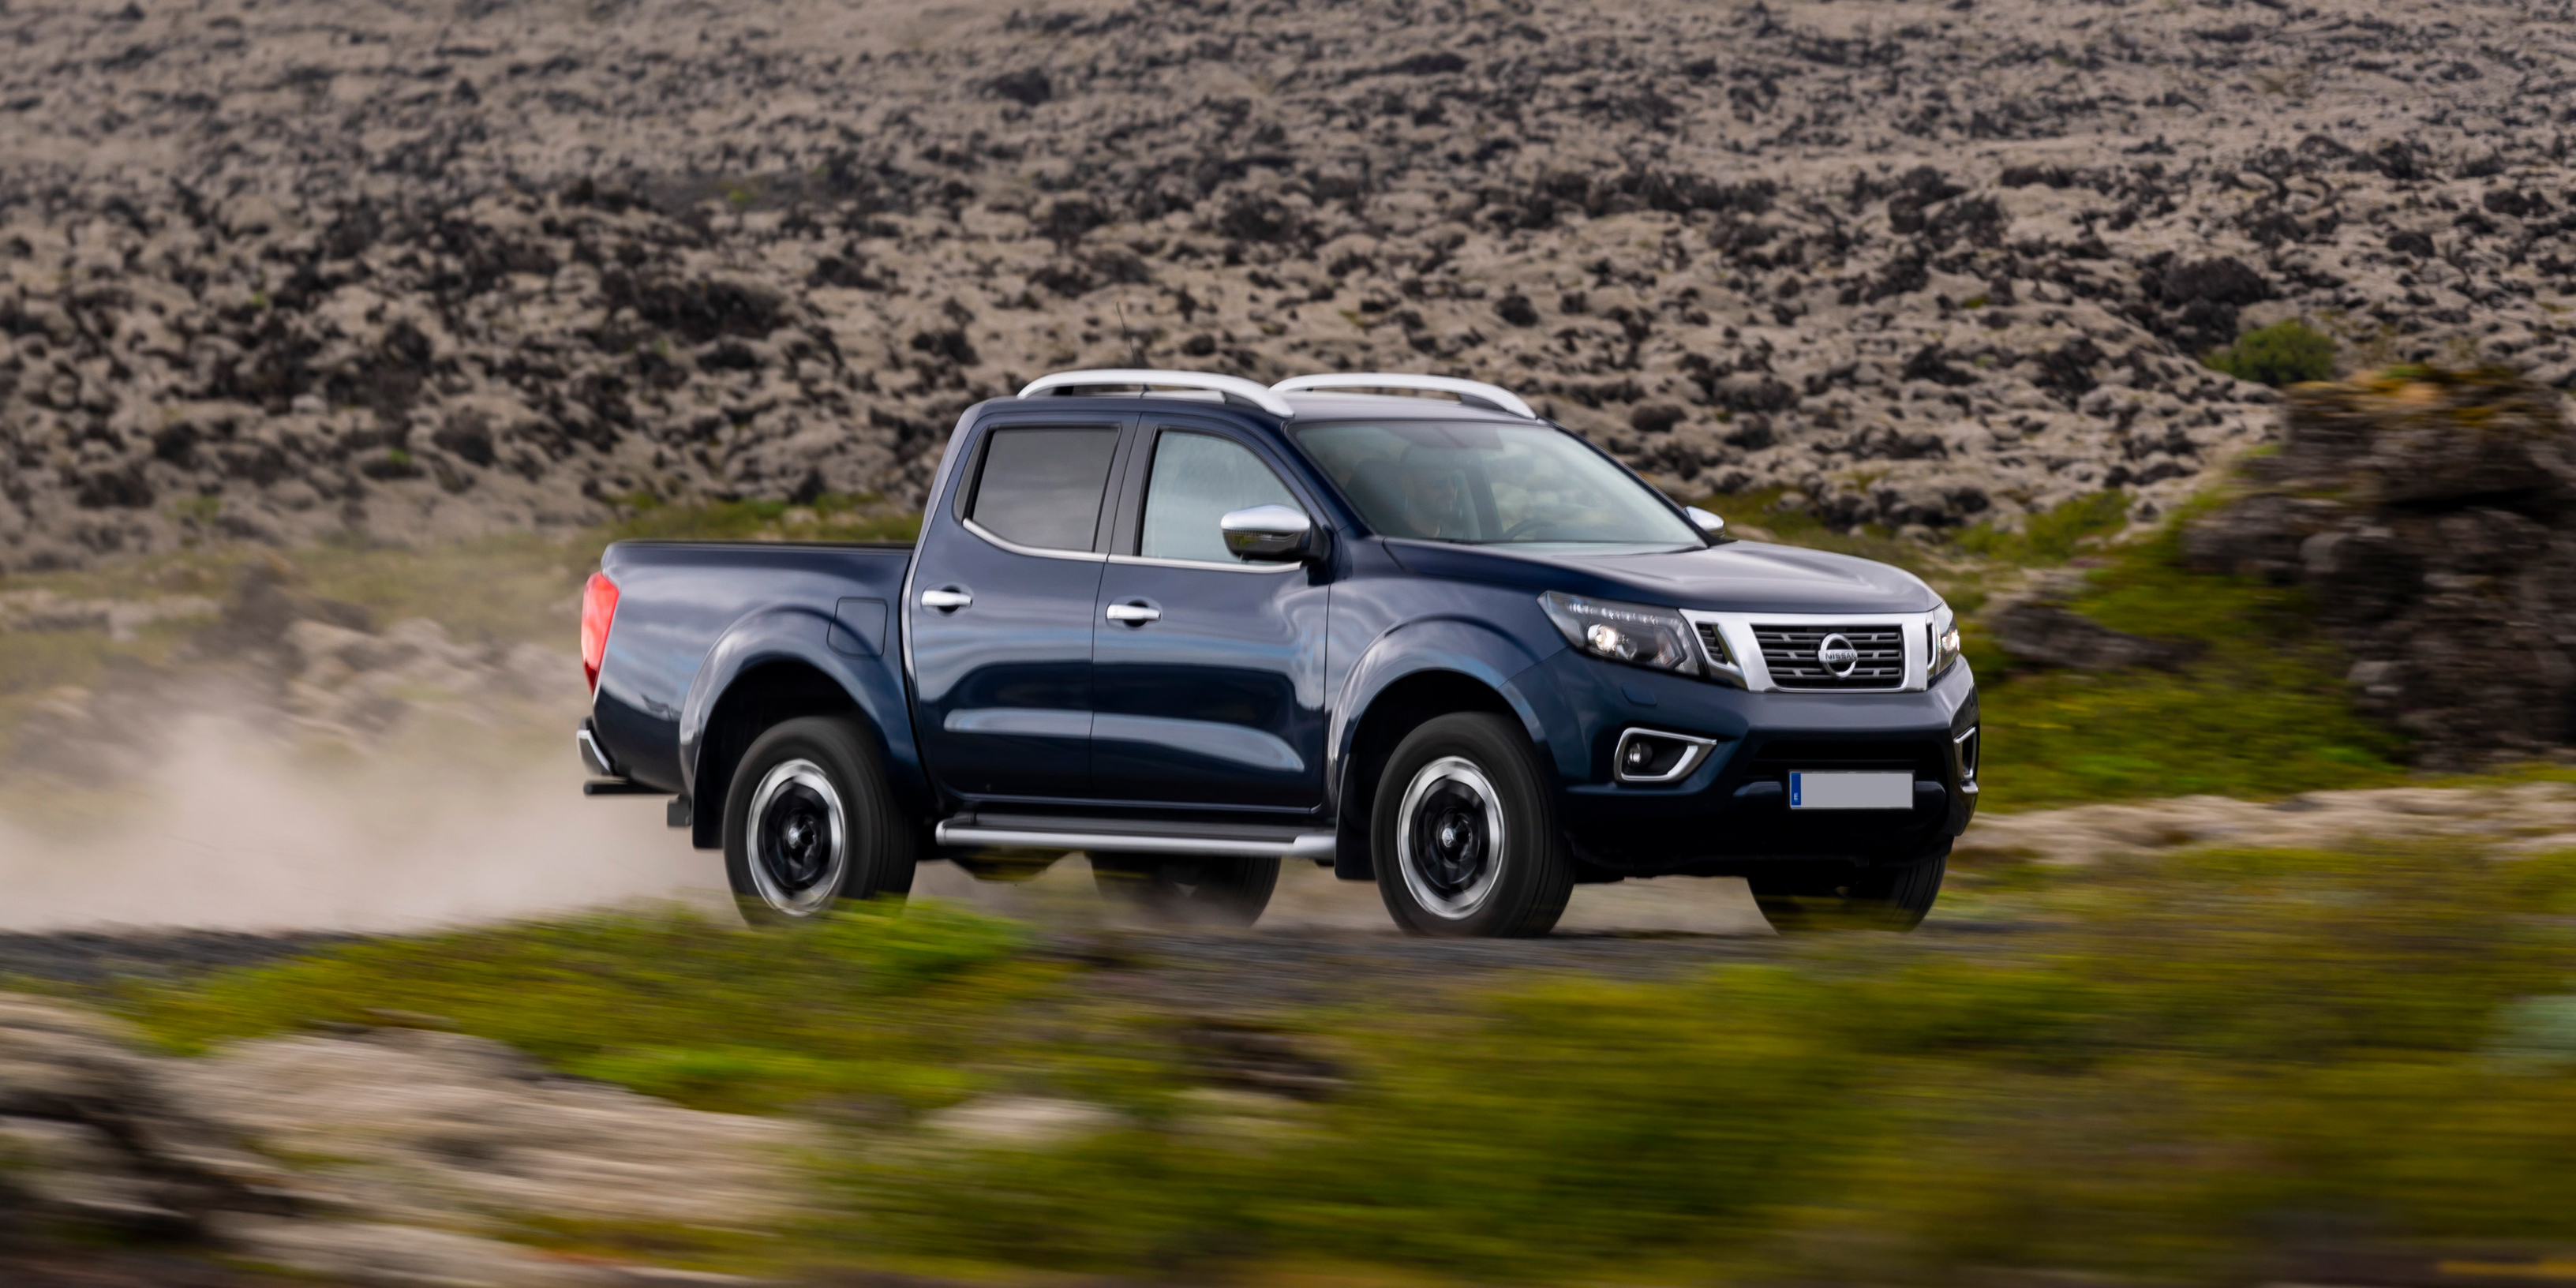 nissan navara germany used – Search for your used car on the parking